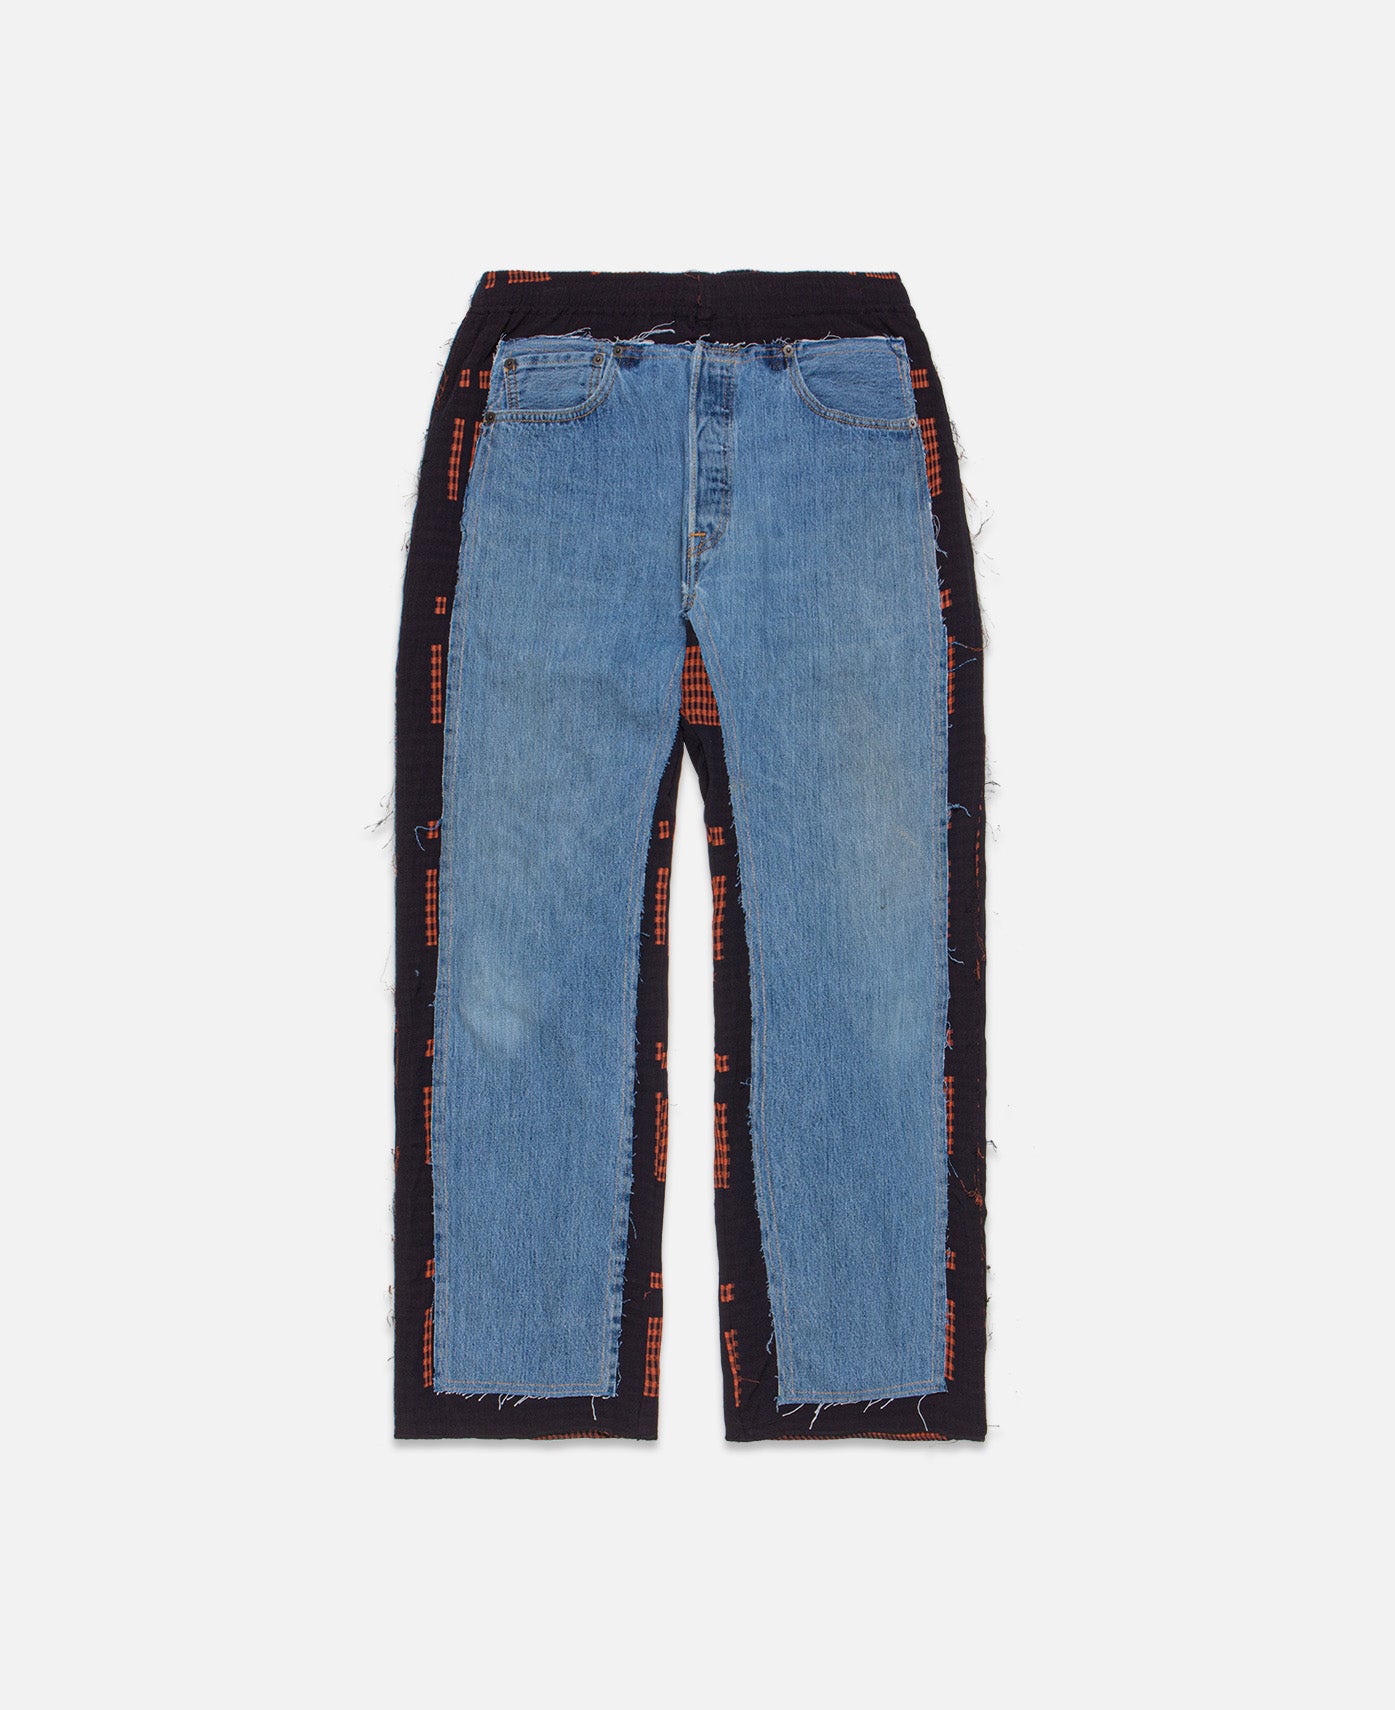 Rebuild By Needles Covered Pants (Blue)